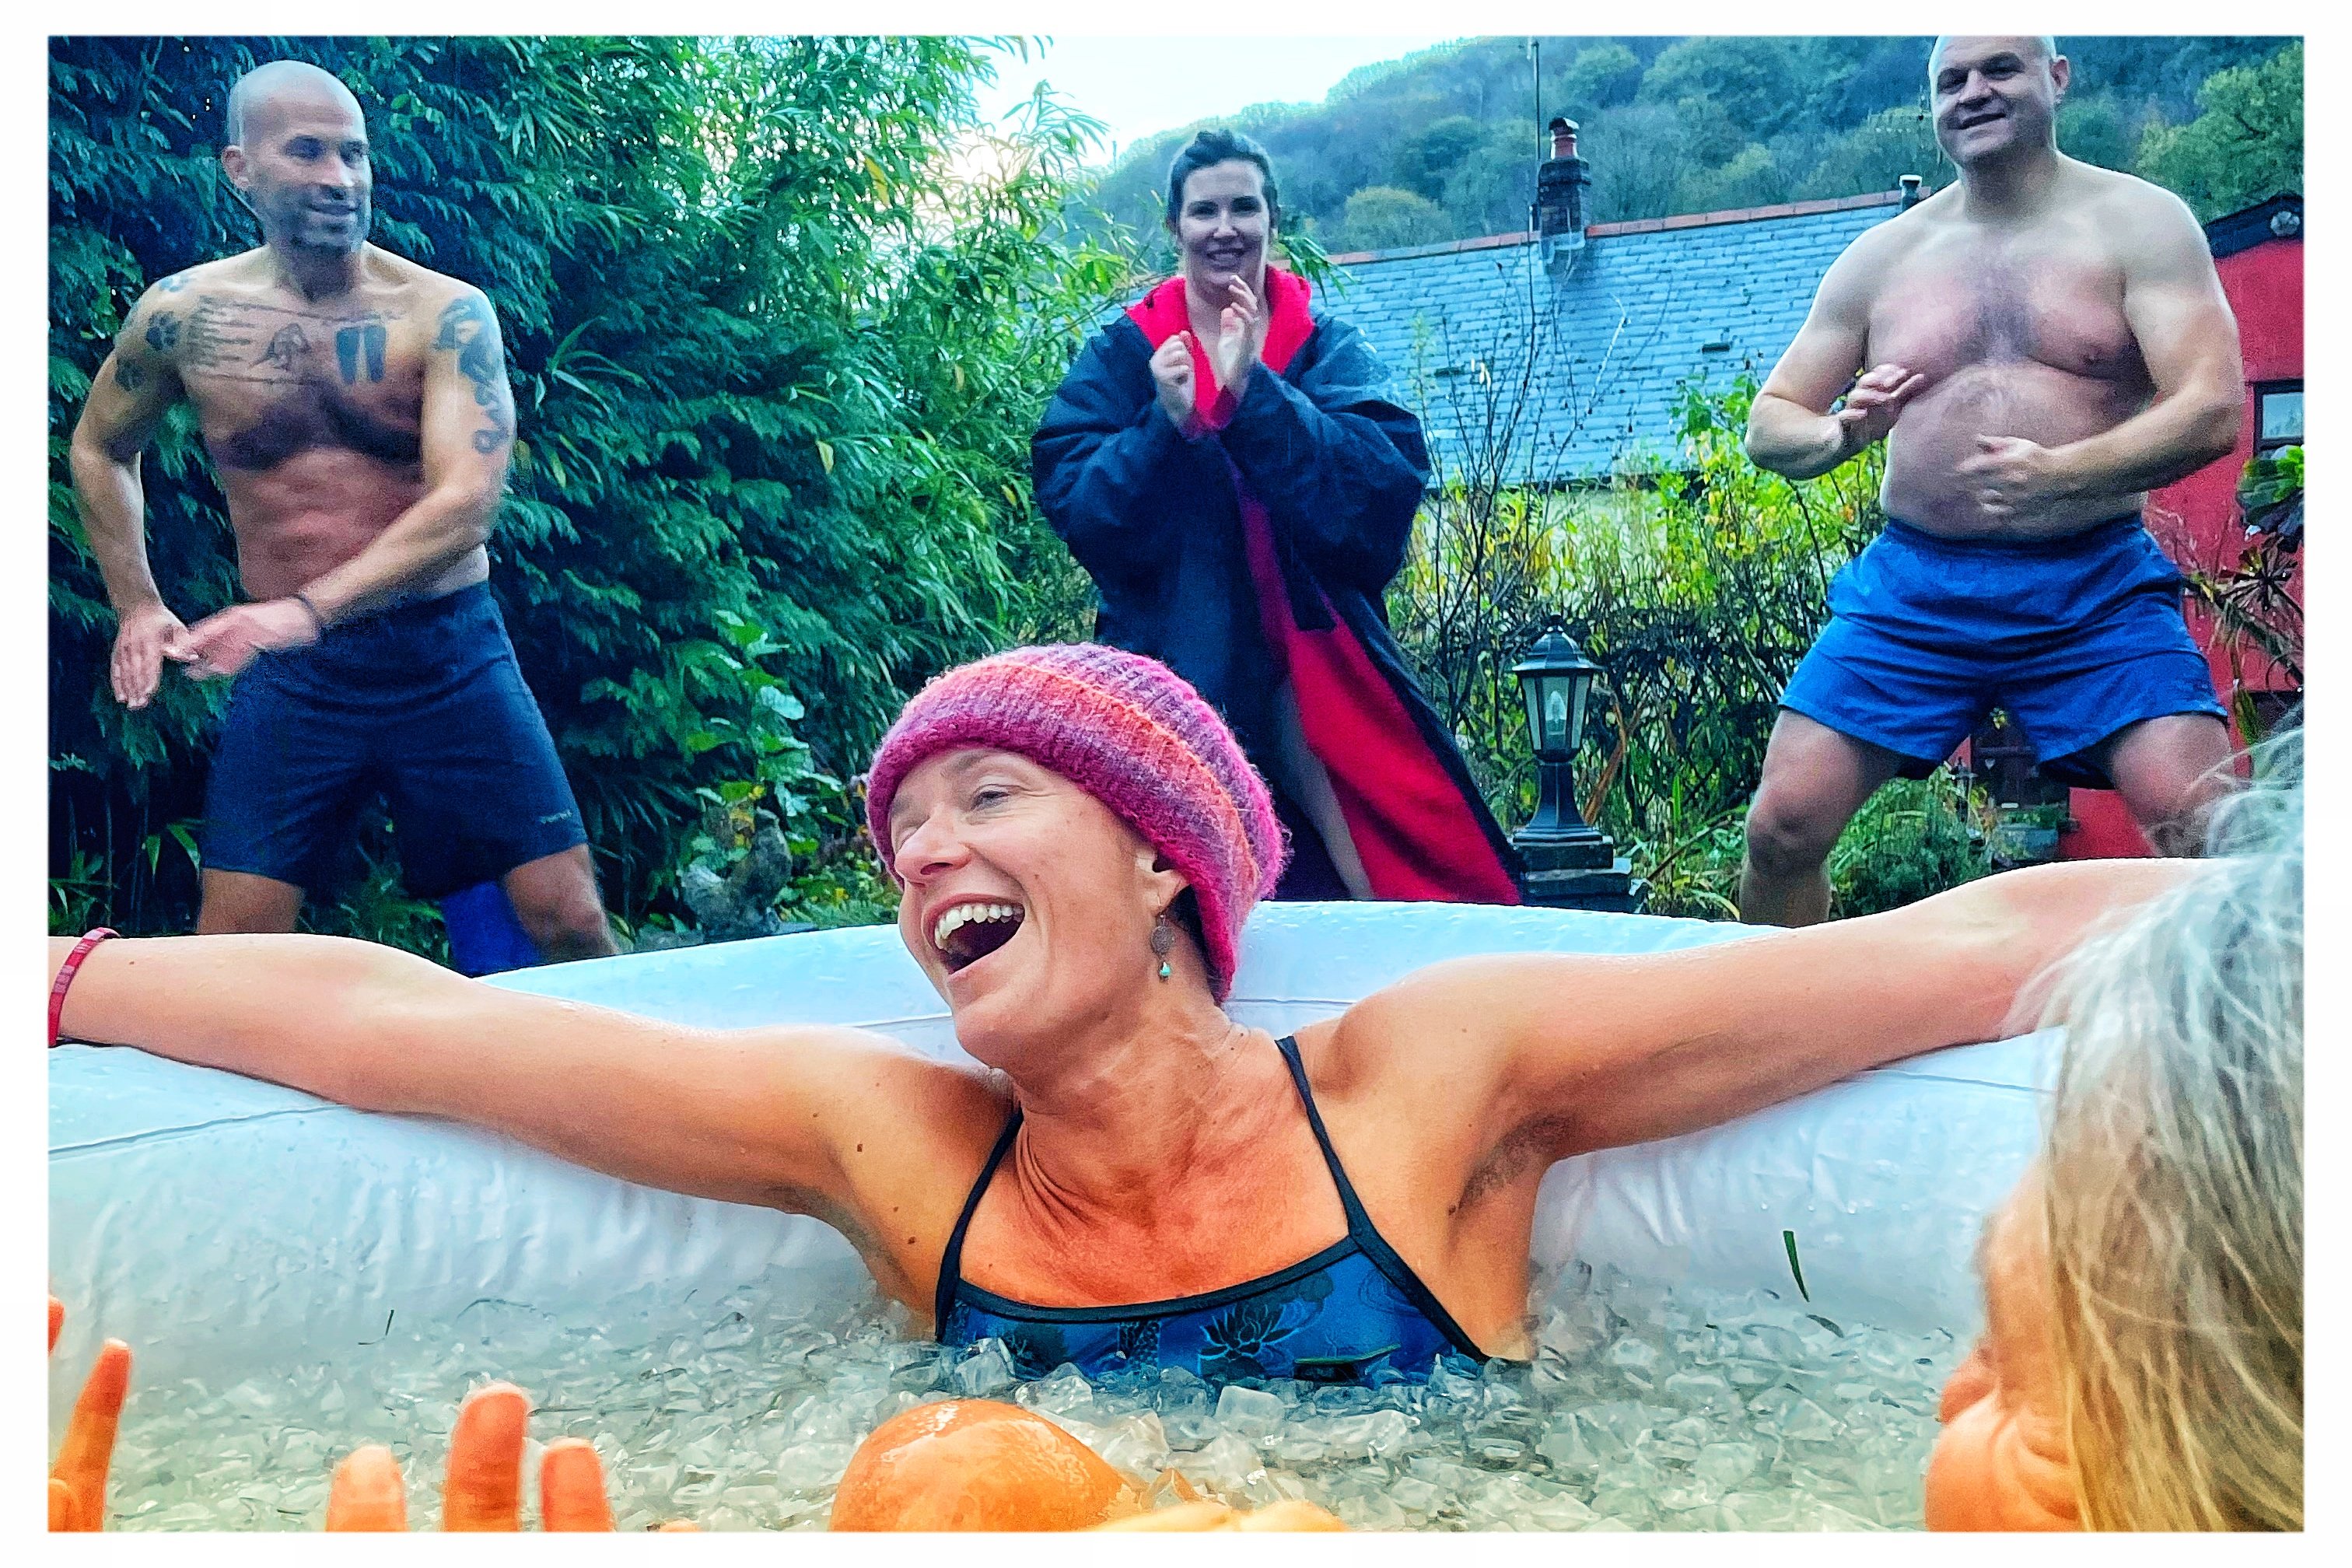 Qigong and the Wim Hof Method with Gus and Emma